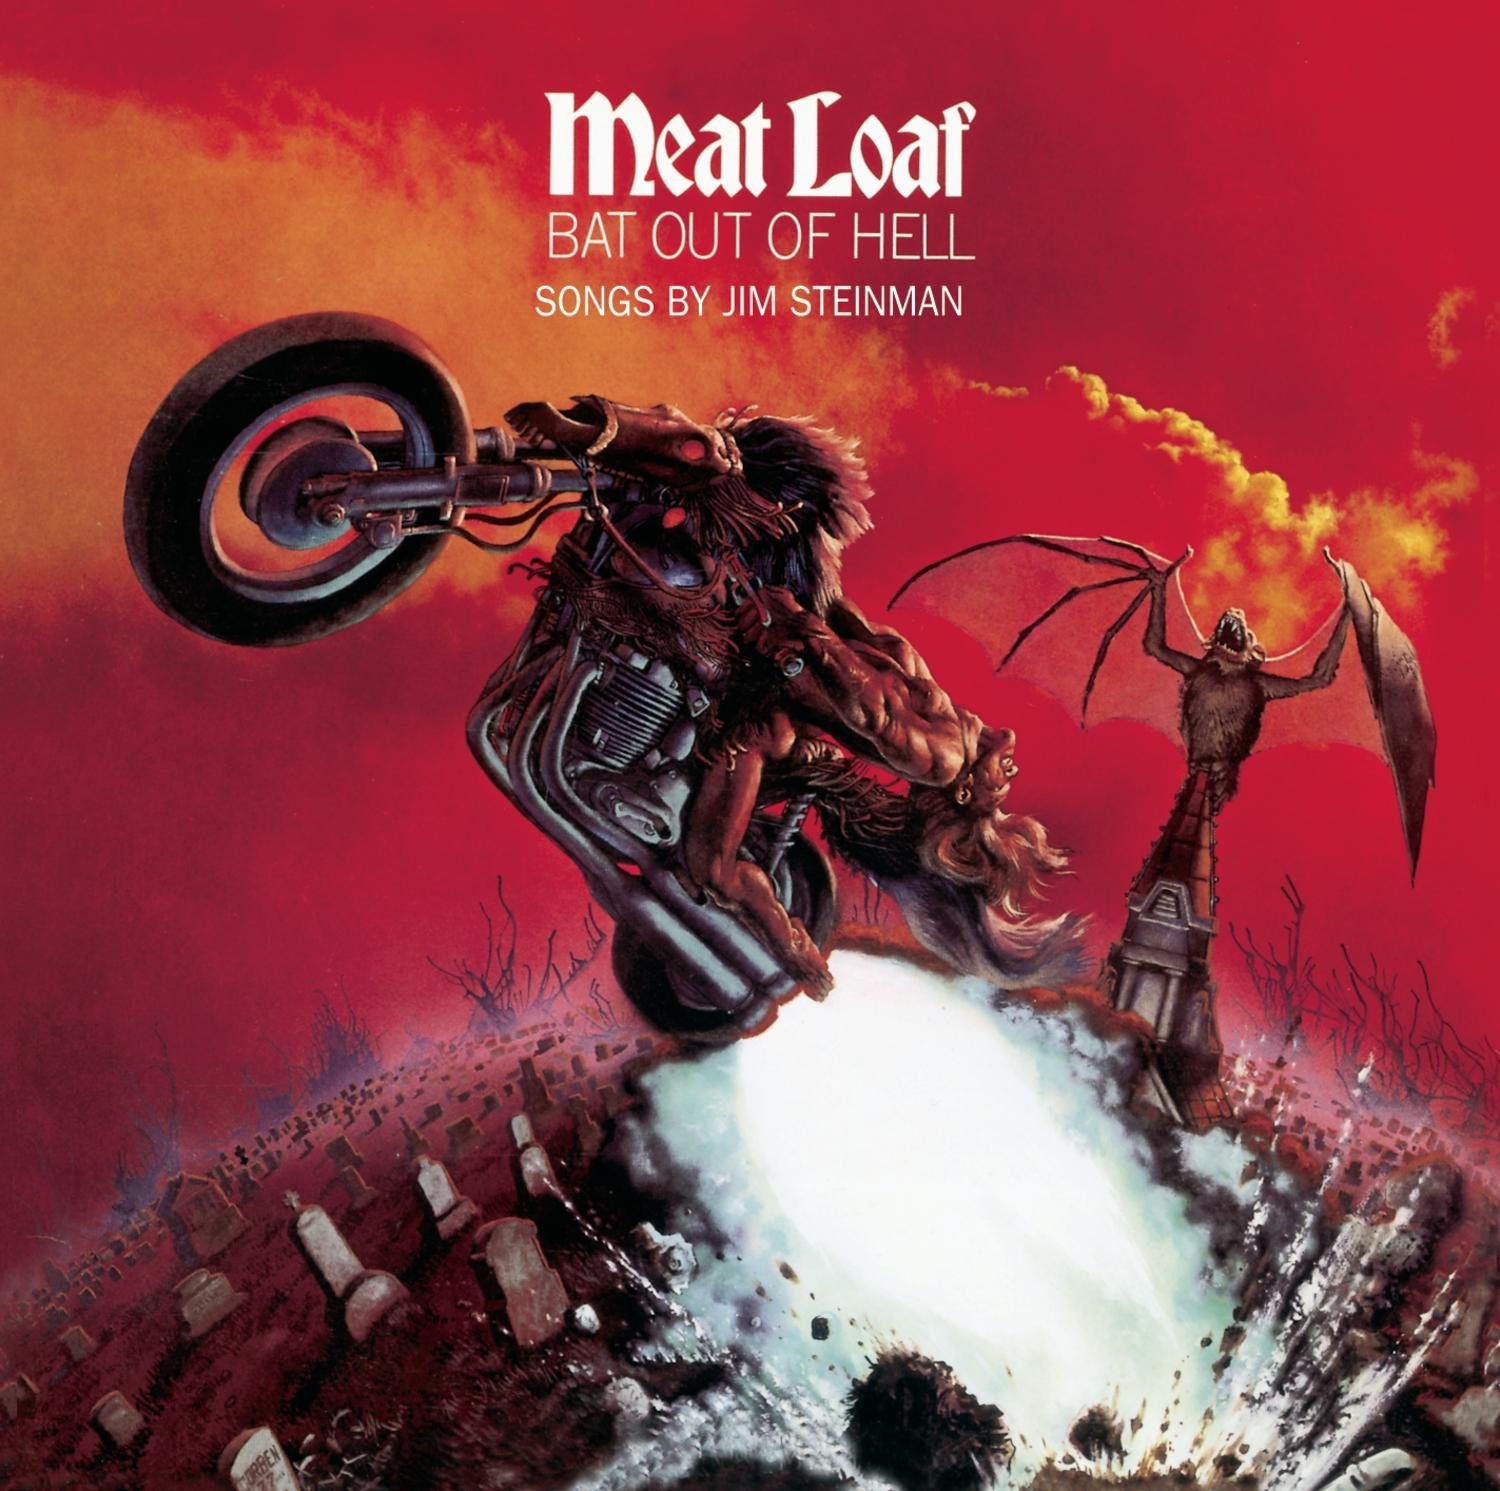 Bat Out Of Hell At 40: What The Hell Explains Its Appeal?